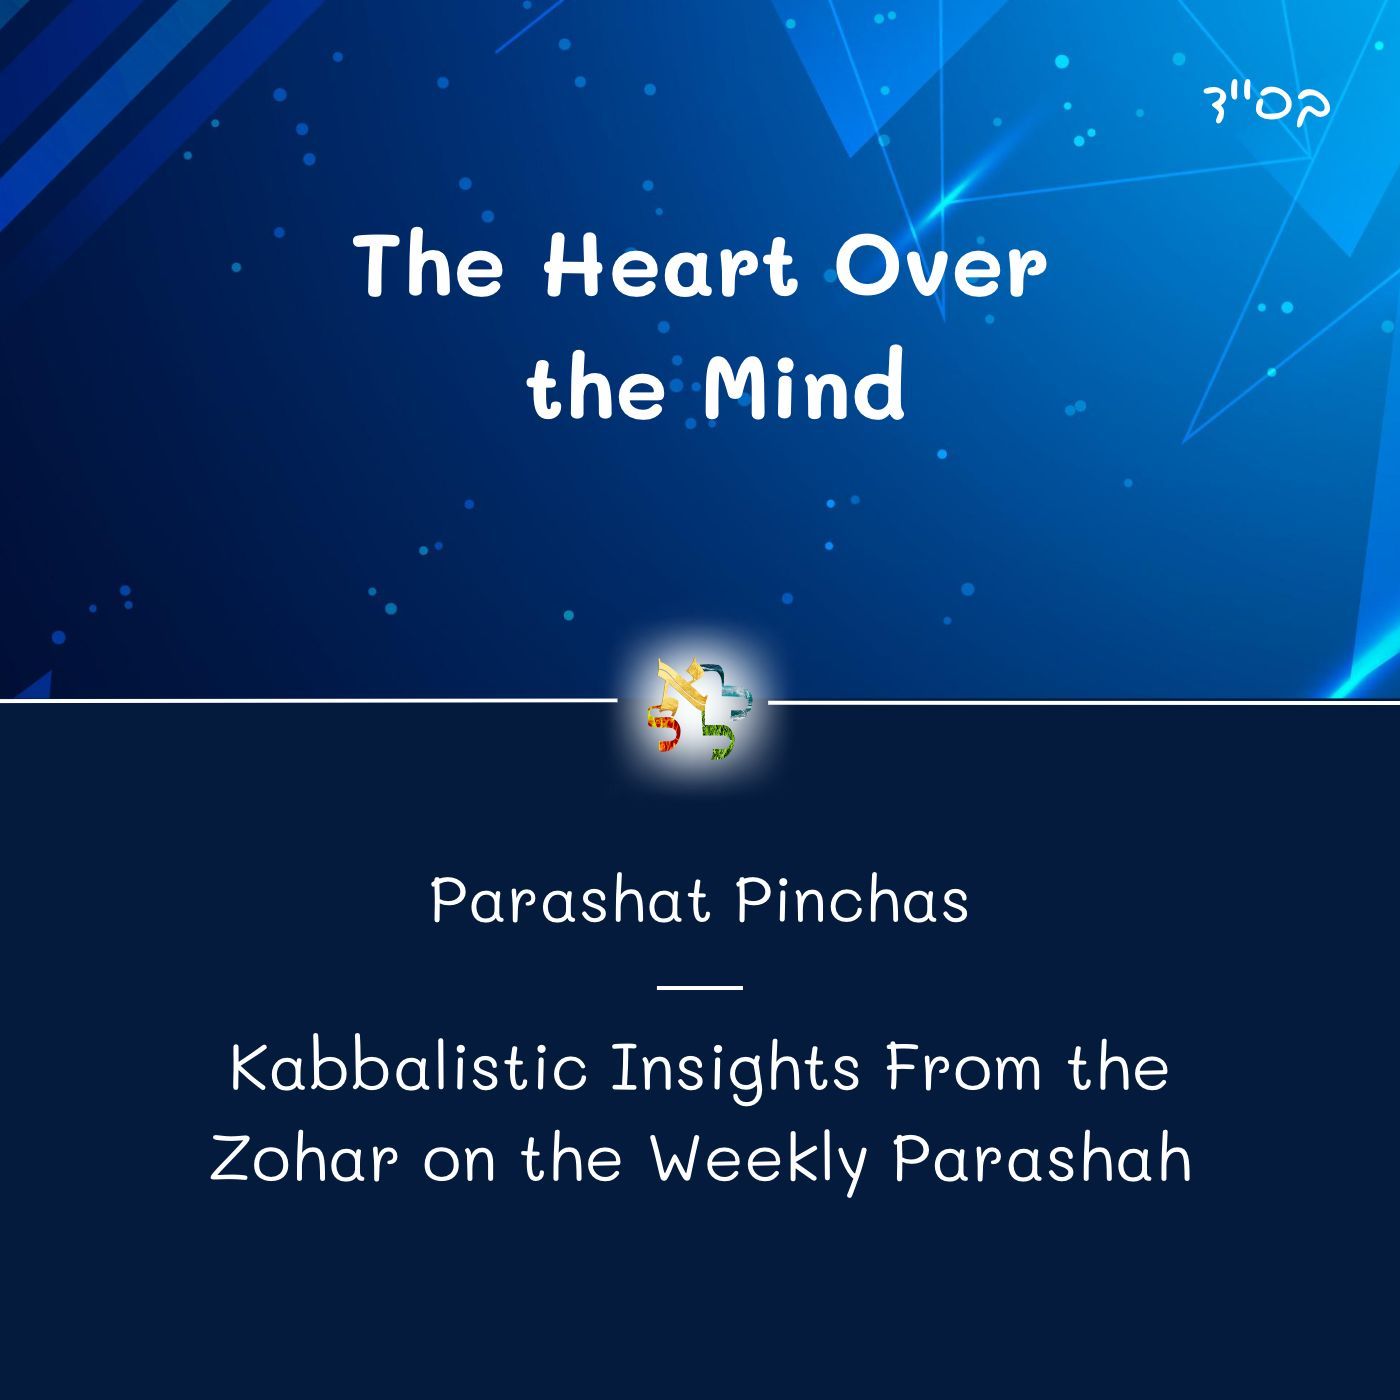 The Heart Over the Mind - Kabbalistic Inspiration on the Parasha from the Zohar